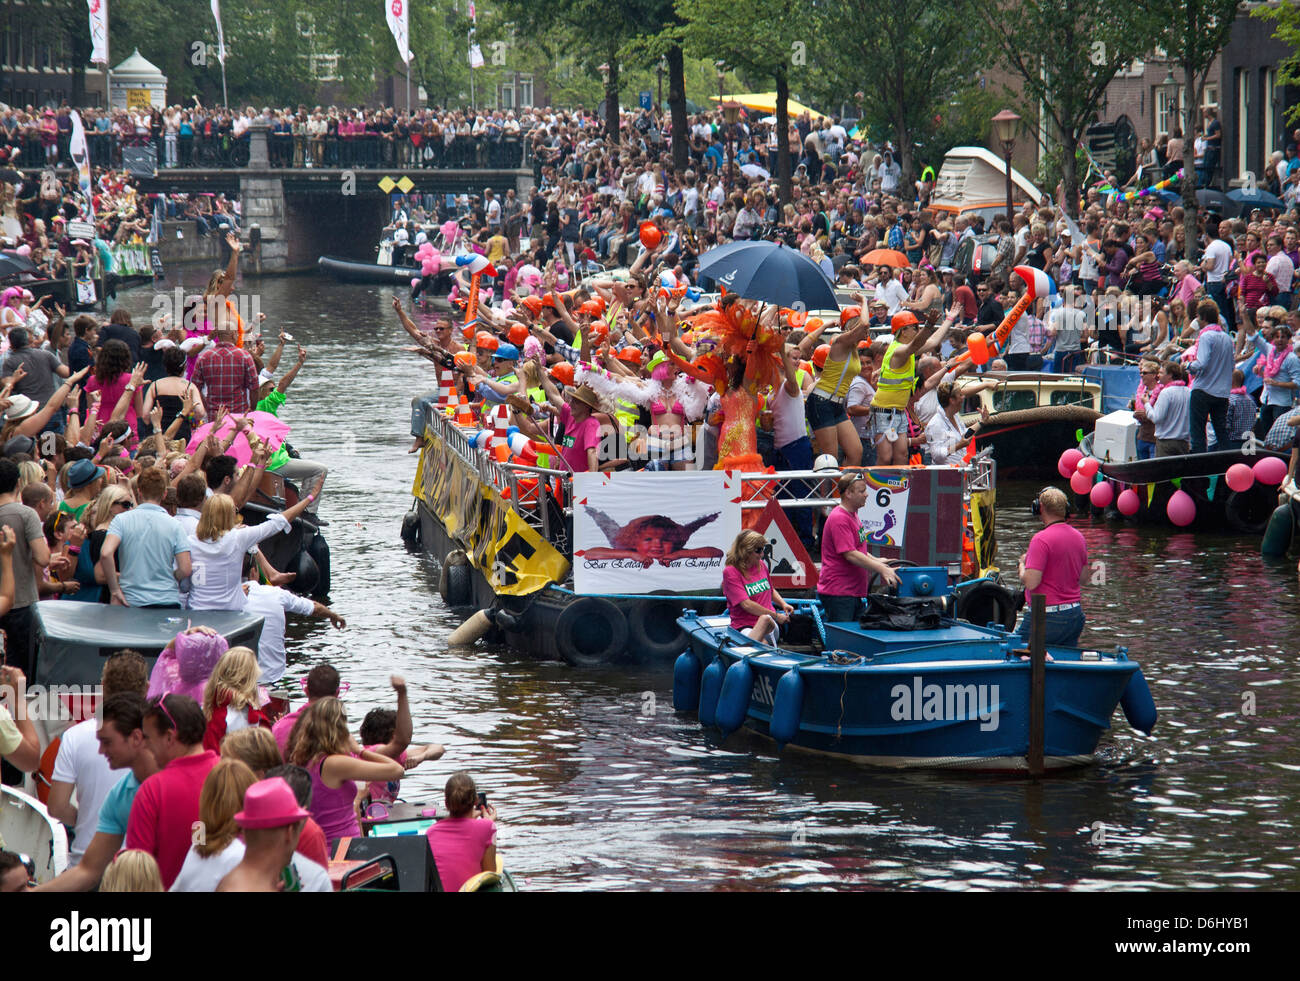 The Gay Pride Parade Down A Crowded Canal Lined With People And Boats